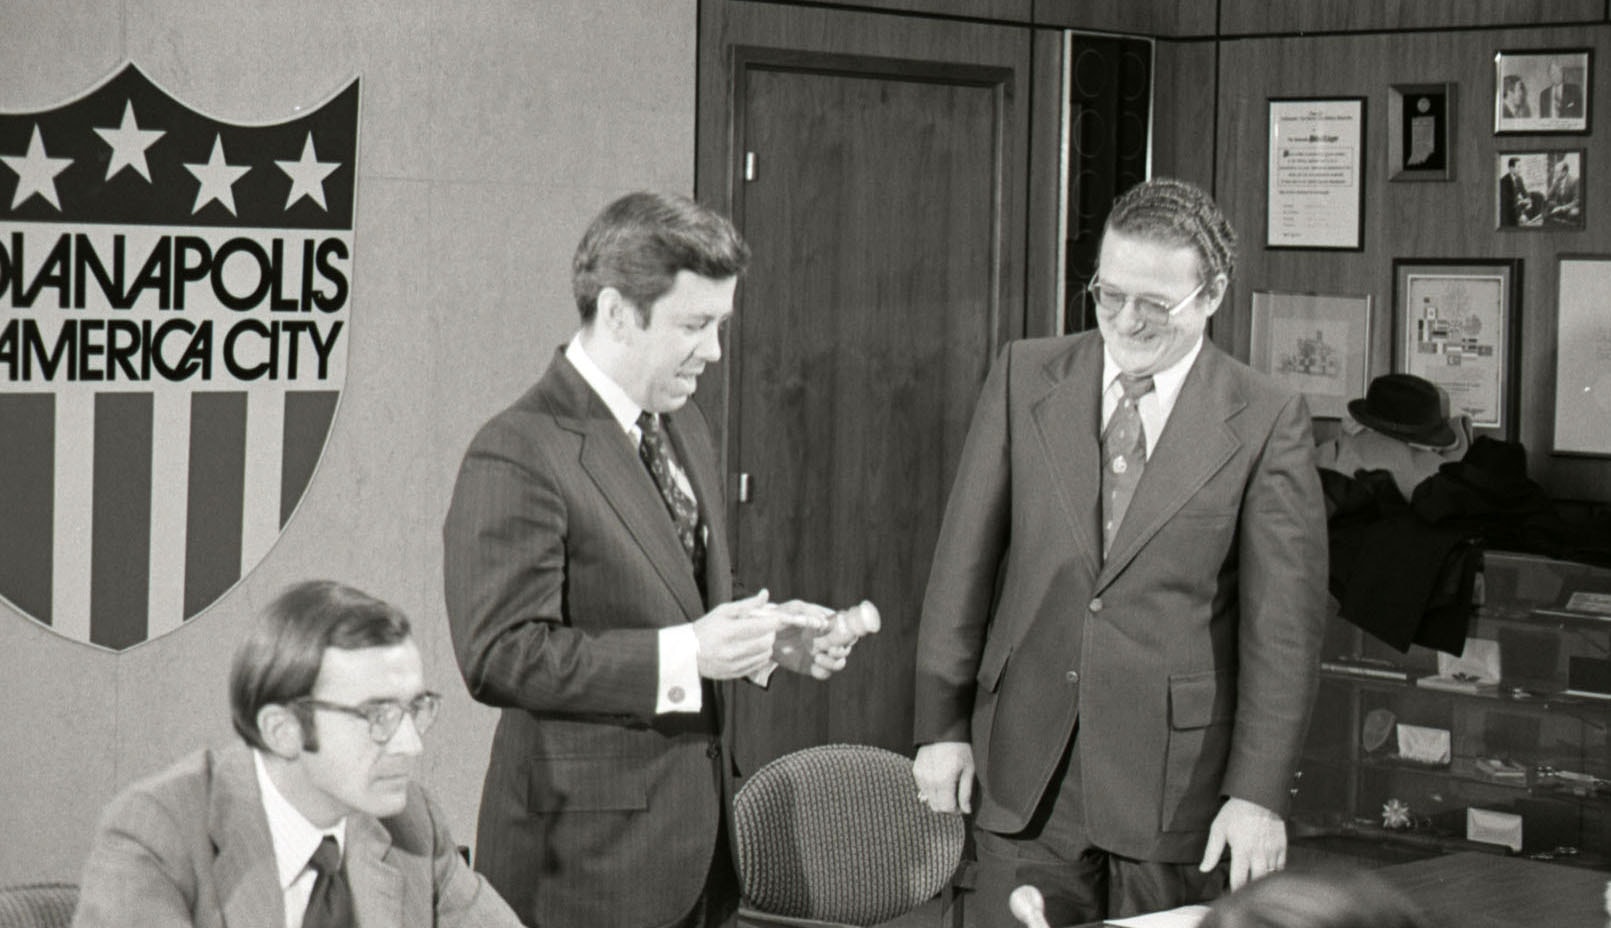 In 1975, then Indianapolis Mayor Richard Lugar presents a ceremonial gavel to University of Indianapolis president Gene E. Sease. Photo courtesy of the University of Indianapolis.